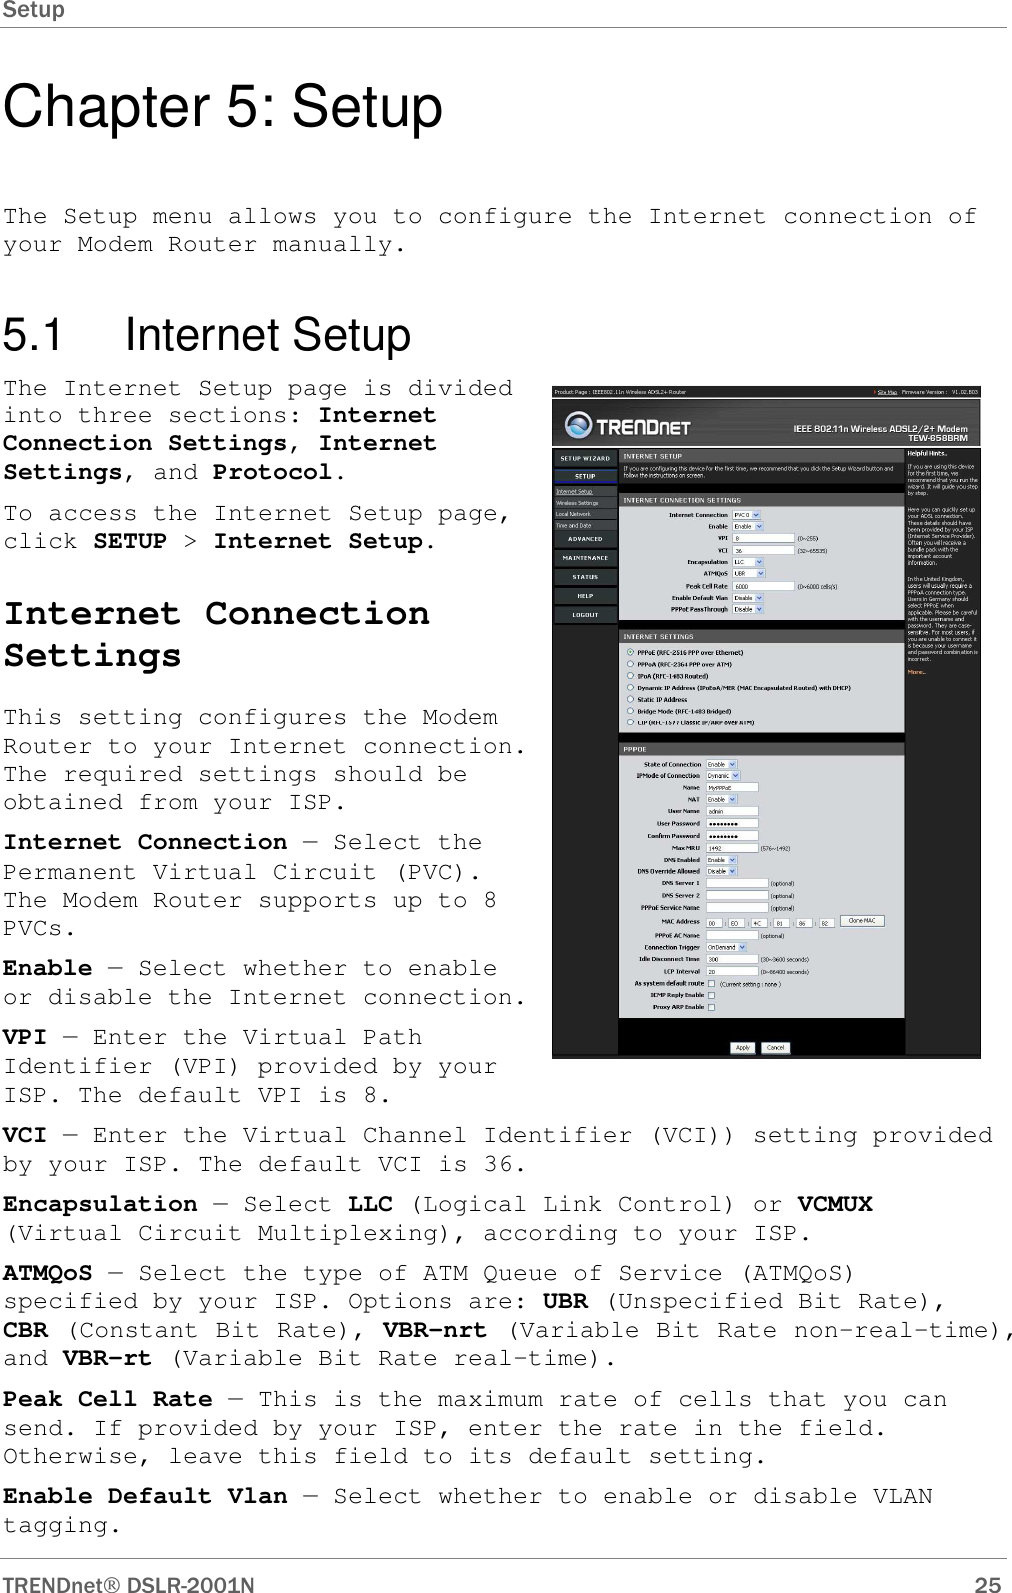 Setup      TRENDnet DSLR-2001N        25 Chapter 5: Setup The Setup menu allows you to configure the Internet connection of your Modem Router manually. 5.1  Internet Setup The Internet Setup page is divided into three sections: Internet Connection Settings, Internet Settings, and Protocol. To access the Internet Setup page, click SETUP &gt; Internet Setup. Internet Connection Settings This setting configures the Modem Router to your Internet connection. The required settings should be obtained from your ISP. Internet Connection — Select the Permanent Virtual Circuit (PVC). The Modem Router supports up to 8 PVCs. Enable — Select whether to enable or disable the Internet connection. VPI — Enter the Virtual Path Identifier (VPI) provided by your ISP. The default VPI is 8. VCI — Enter the Virtual Channel Identifier (VCI)) setting provided by your ISP. The default VCI is 36. Encapsulation — Select LLC (Logical Link Control) or VCMUX (Virtual Circuit Multiplexing), according to your ISP. ATMQoS — Select the type of ATM Queue of Service (ATMQoS) specified by your ISP. Options are: UBR (Unspecified Bit Rate), CBR (Constant Bit Rate), VBR-nrt (Variable Bit Rate non-real-time), and VBR-rt (Variable Bit Rate real-time). Peak Cell Rate — This is the maximum rate of cells that you can send. If provided by your ISP, enter the rate in the field. Otherwise, leave this field to its default setting. Enable Default Vlan — Select whether to enable or disable VLAN tagging.  